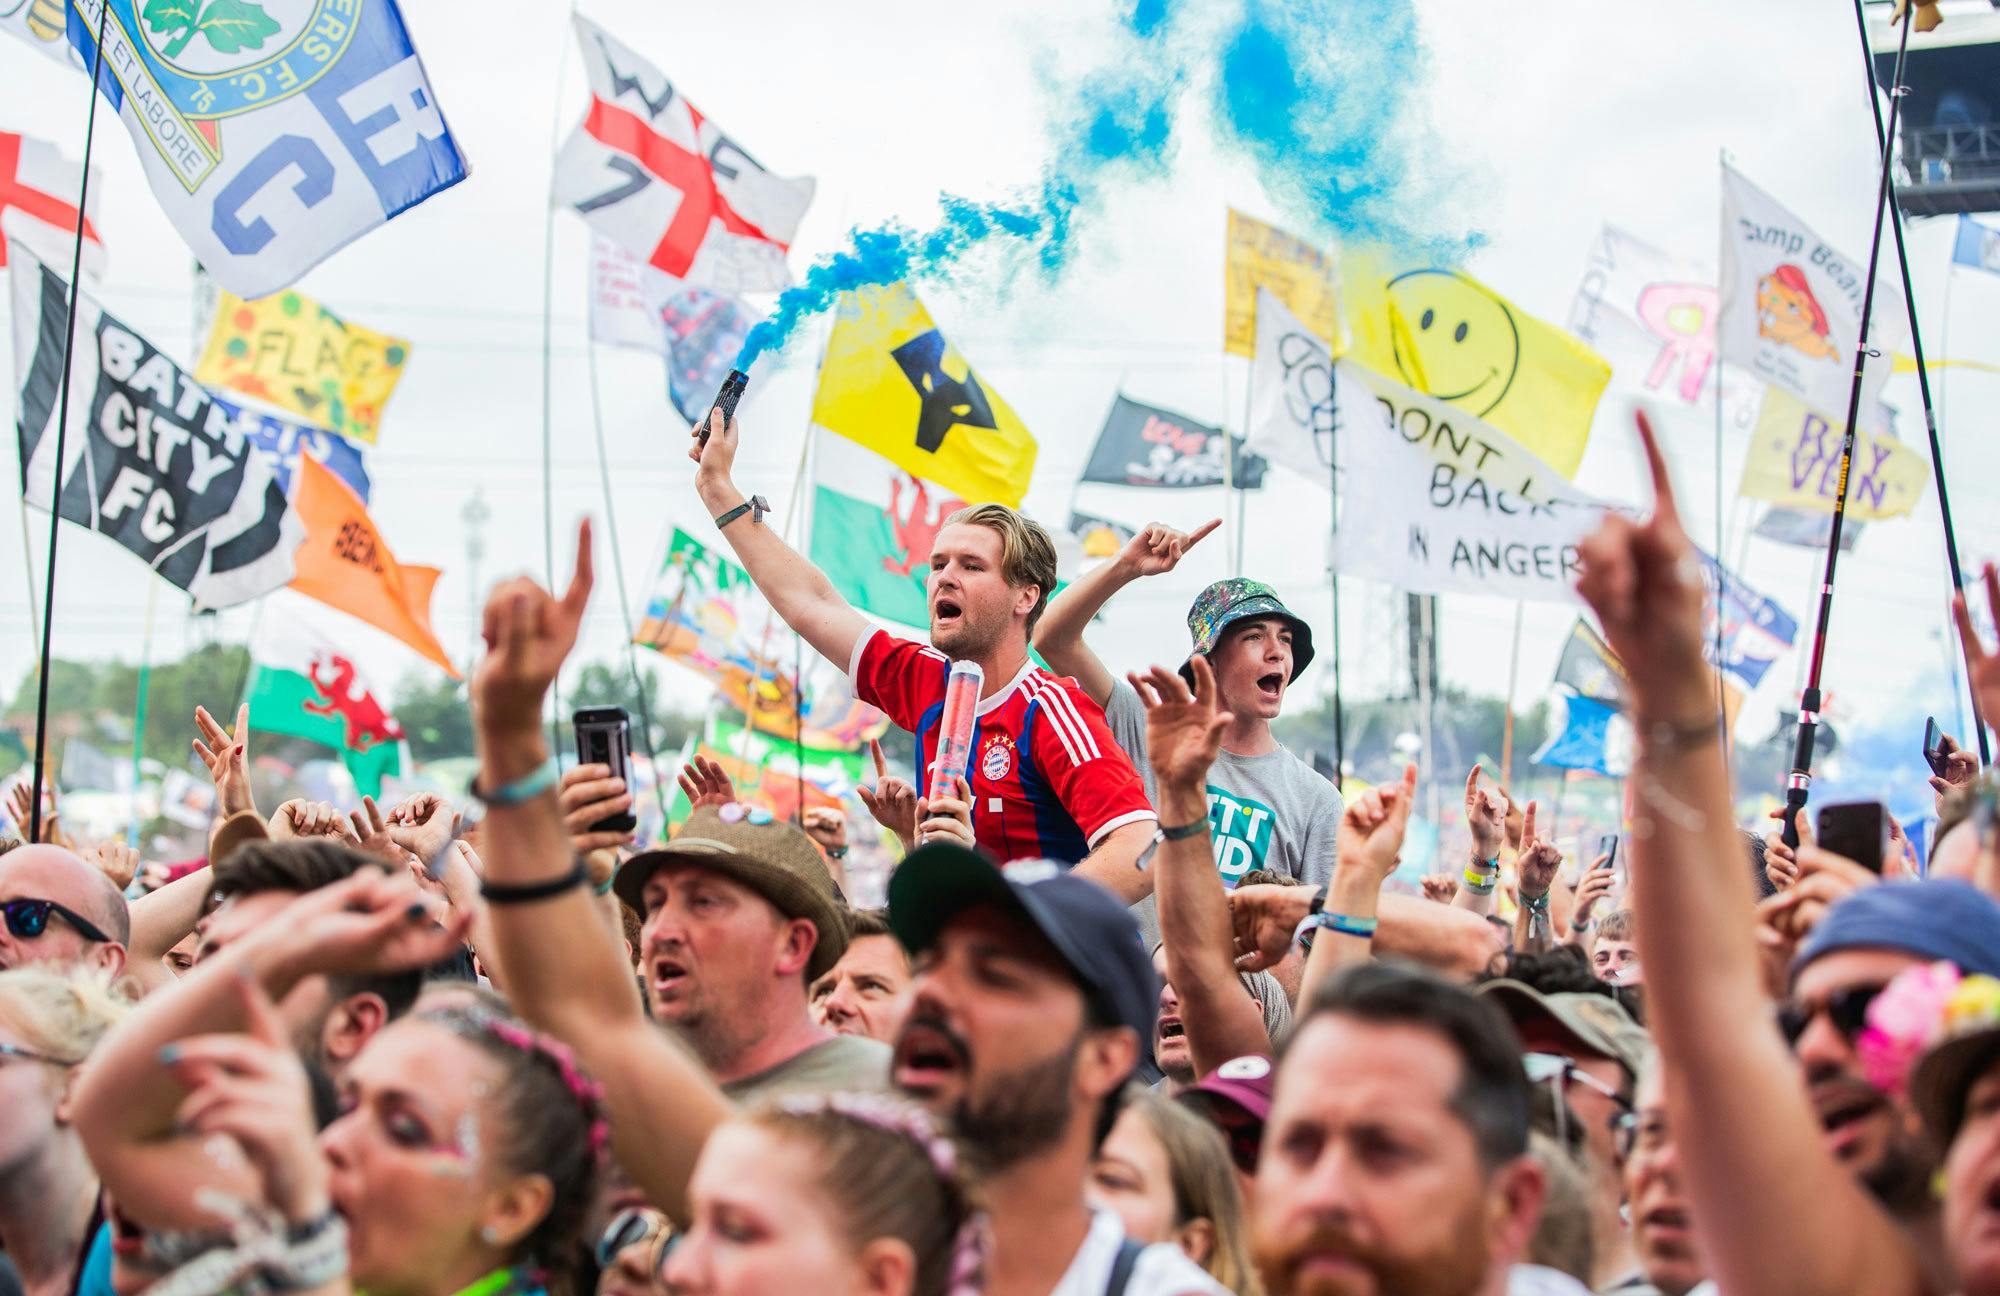 Glastonbury 2021 has officially been cancelled